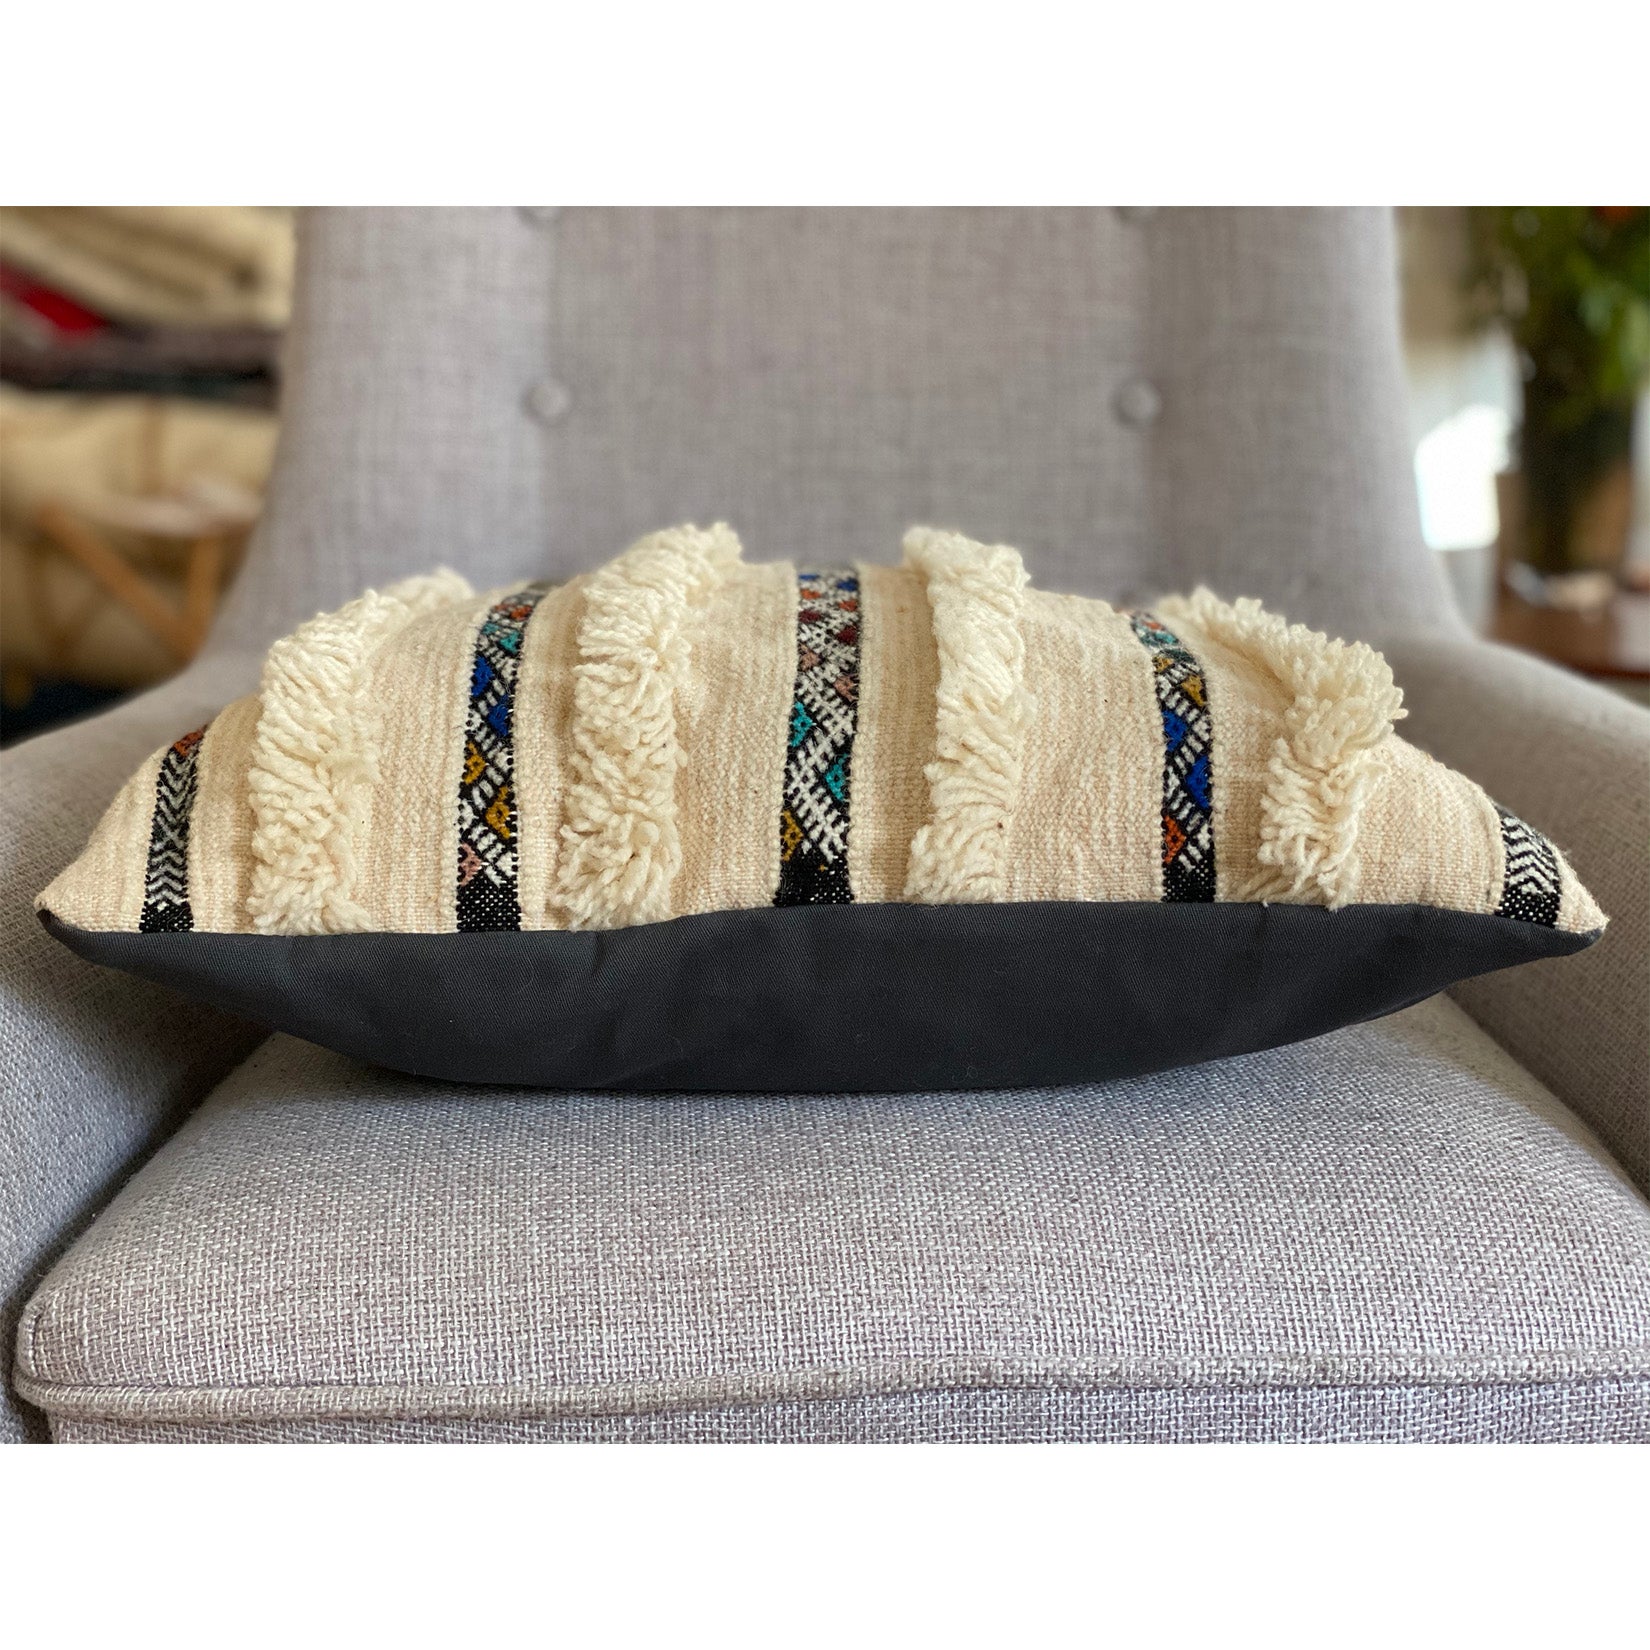 Side view of colorful Moroccan wedding blanket handira pillow on a grey mid century modern armchair